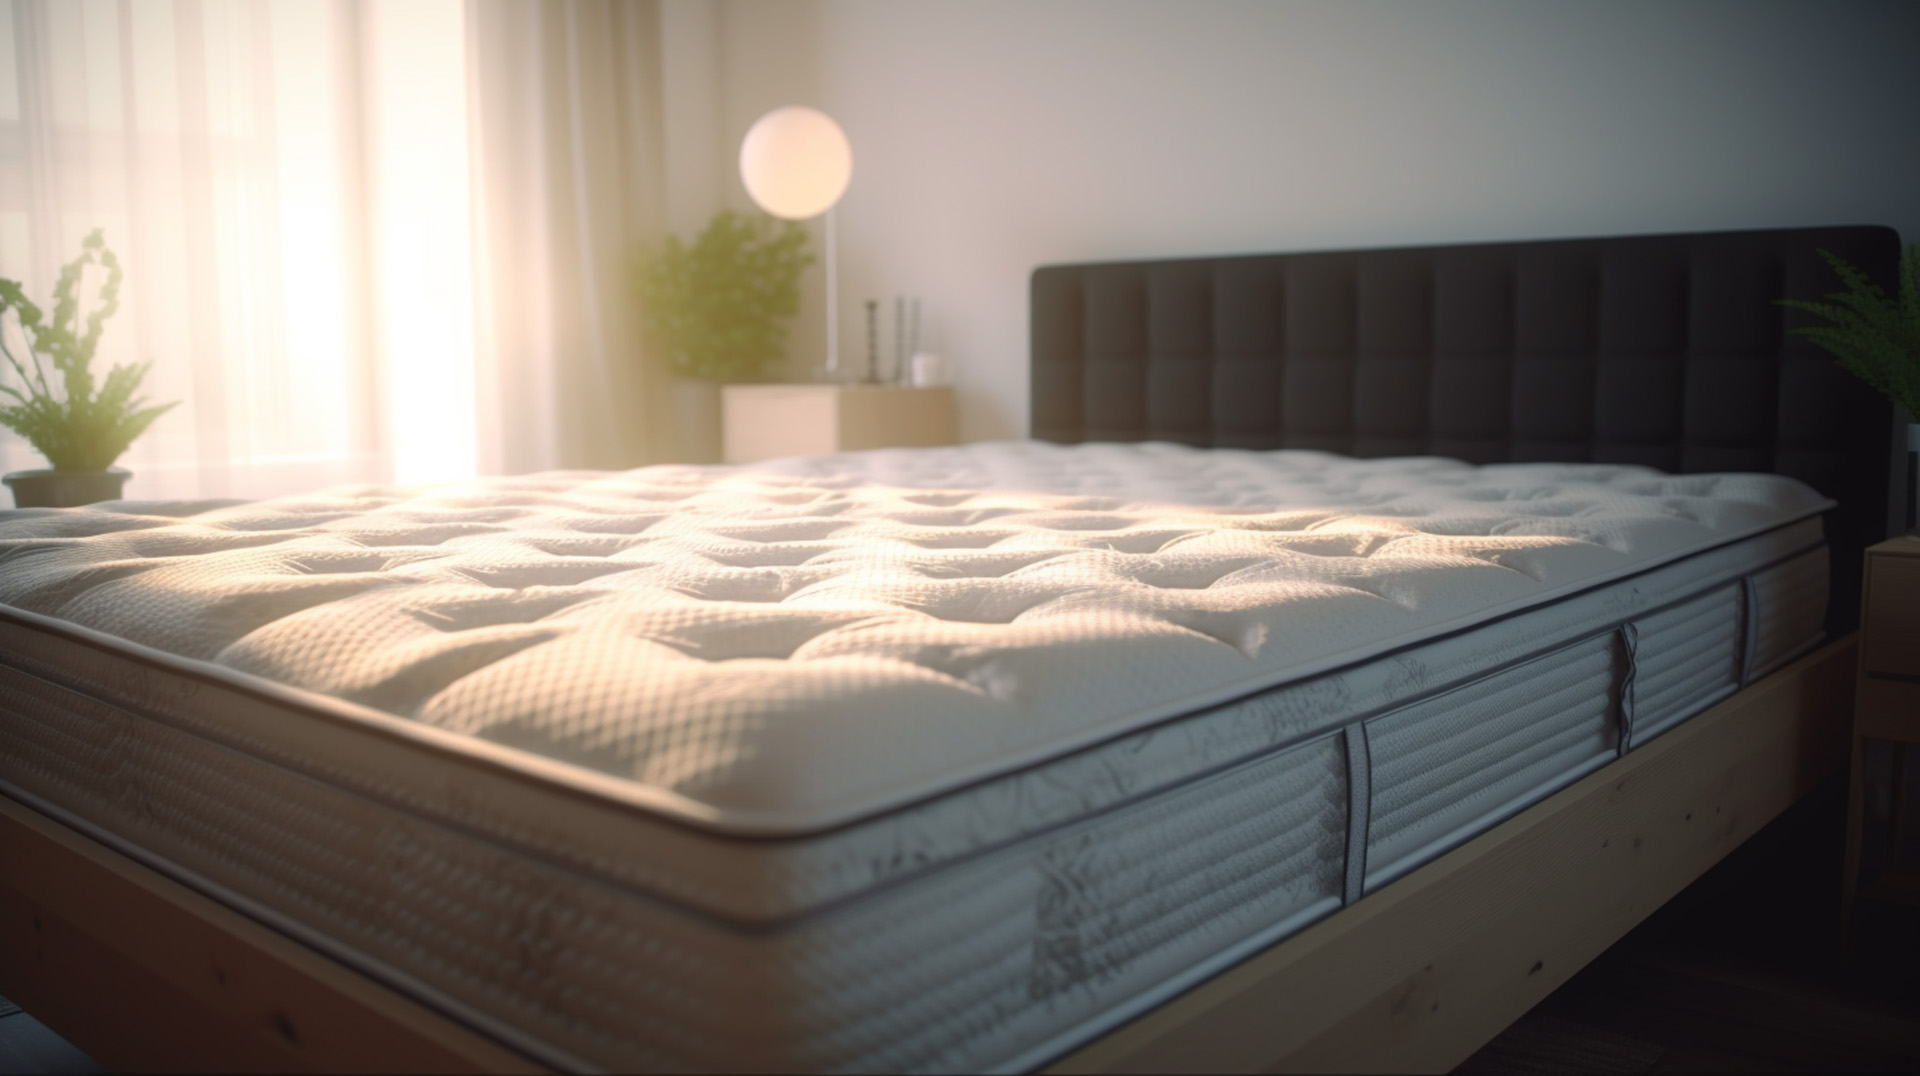 Shop Organic Mattresses and Beds in Jackson Heights, NY